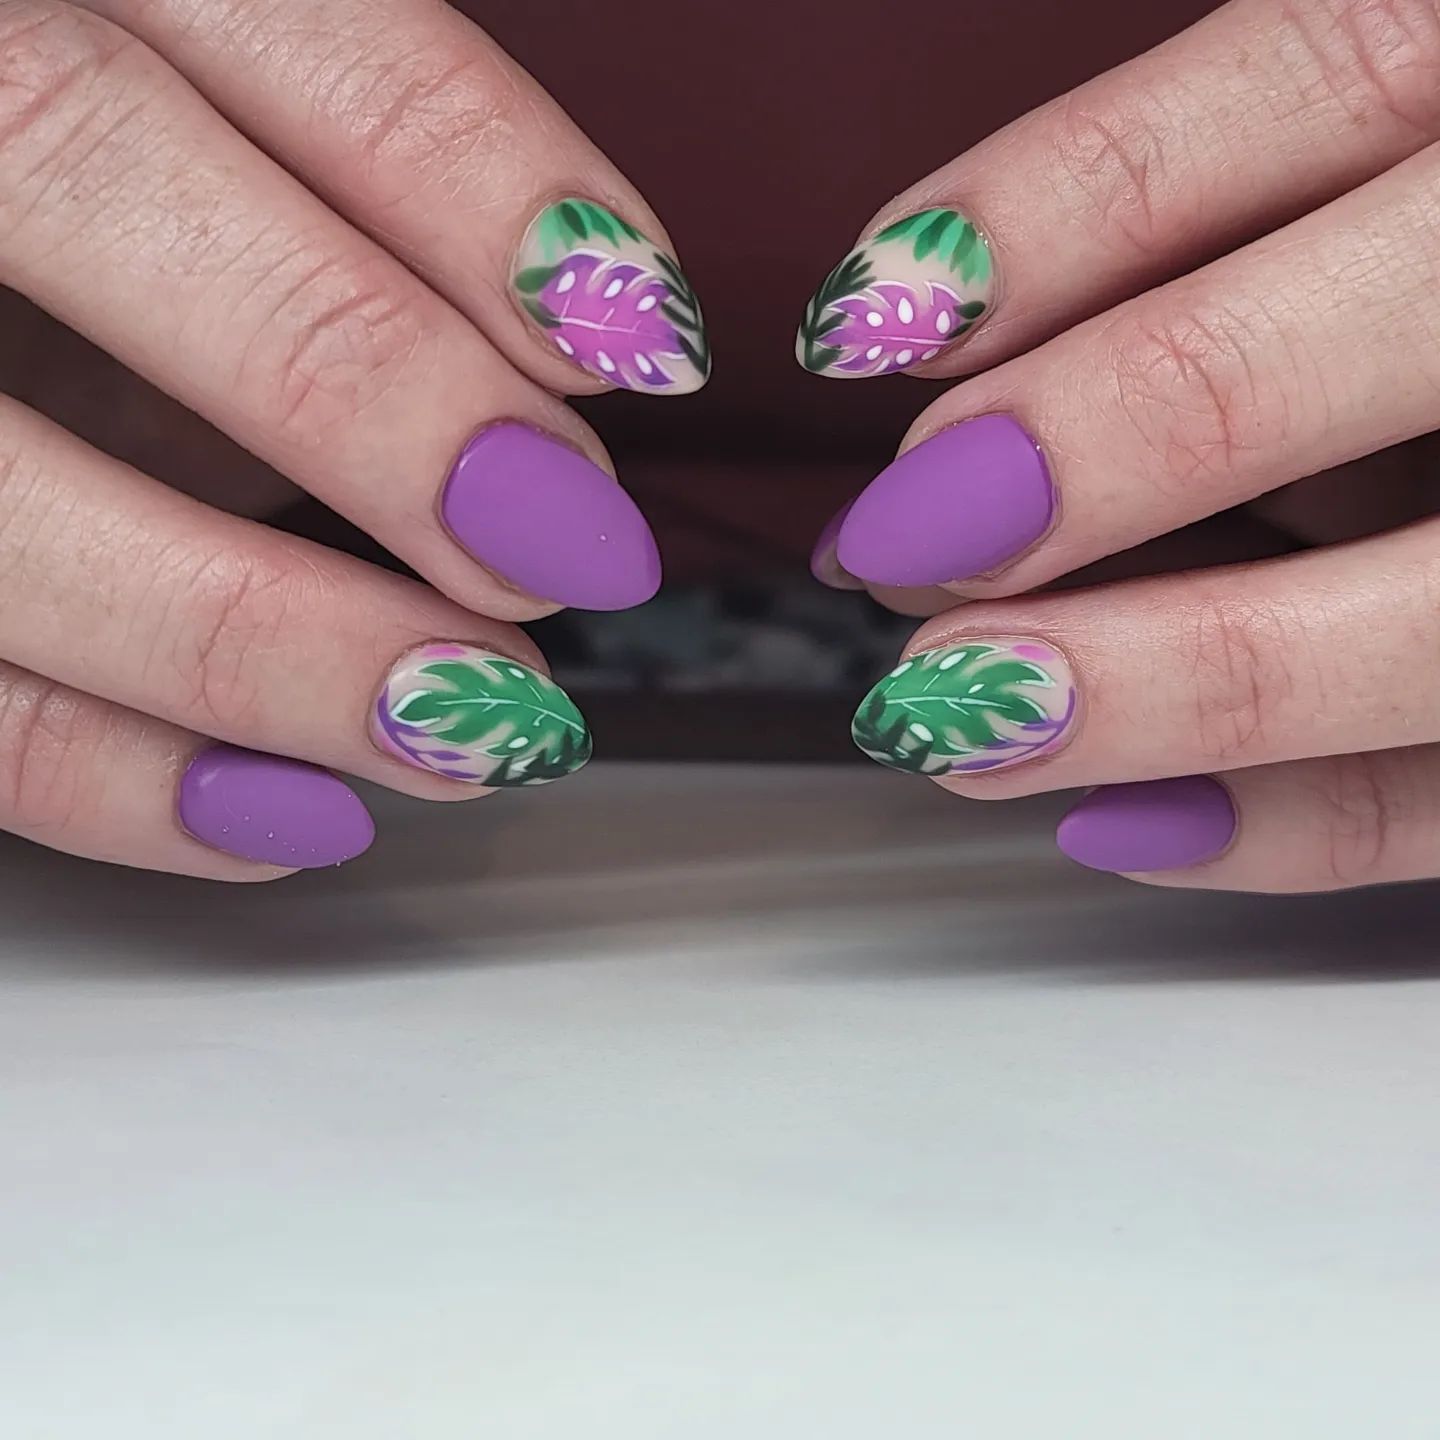  This is for those who love matte look. To give your lilac matte nails an energy, lilac and green leaves accent nails are great.